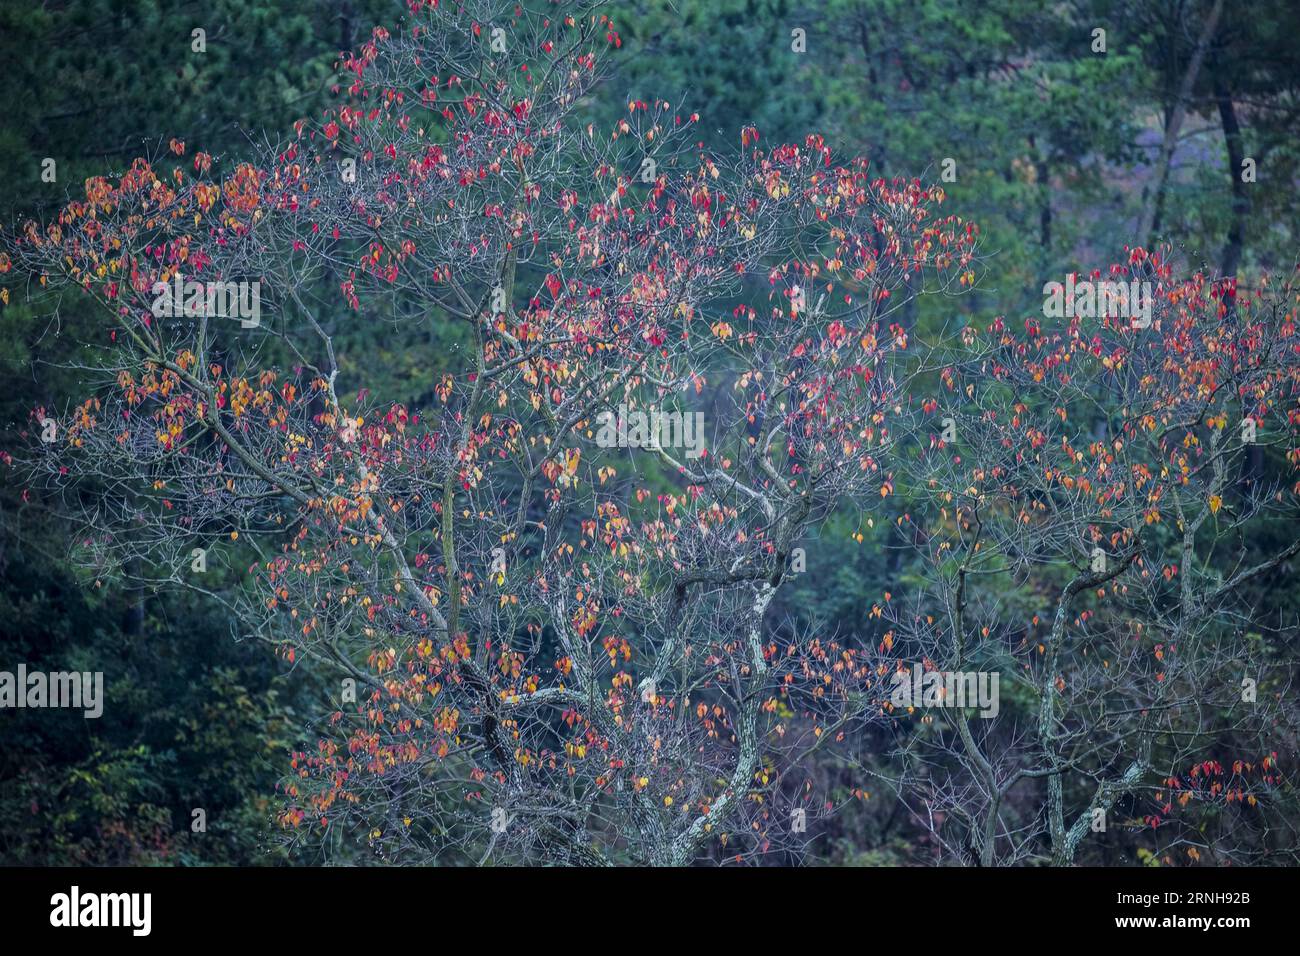 (161103) -- DAWU, Nov. 2, 2016 -- Photo taken on Nov. 2, 2016 shows a Chinese tallow tree in Beishan Village of Dawu County, central China s Hubei Province. Chinese tallow tree, known as Sapium sebiferum scientifically, is a good material for furniture, and its resin and seeds can produce oil for industrial use. ) (wf) CHINA-HUBEI-CHINESE TALLOW TREE (CN) DuxHuaju PUBLICATIONxNOTxINxCHN   Dawu Nov 2 2016 Photo Taken ON Nov 2 2016 Shows a Chinese tallow Tree in Beishan Village of Dawu County Central China S Hubei Province Chinese tallow Tree known As Sapium sebiferum scientifically IS a Good Ma Stock Photo